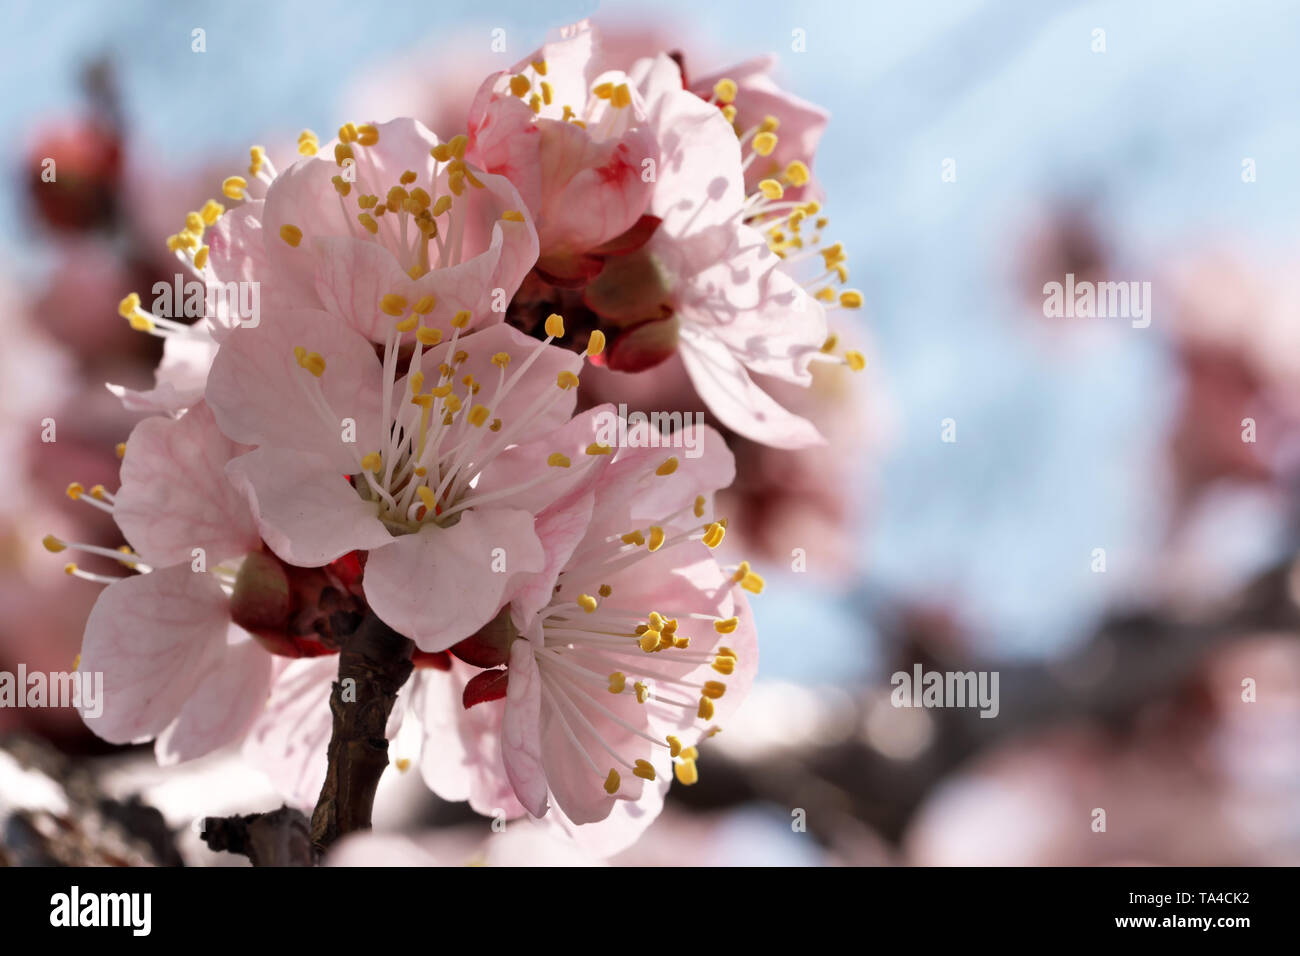 Closeup apricot flowers bloom on a bright sunny spring day in a fruit garden close-up macro photography Stock Photo